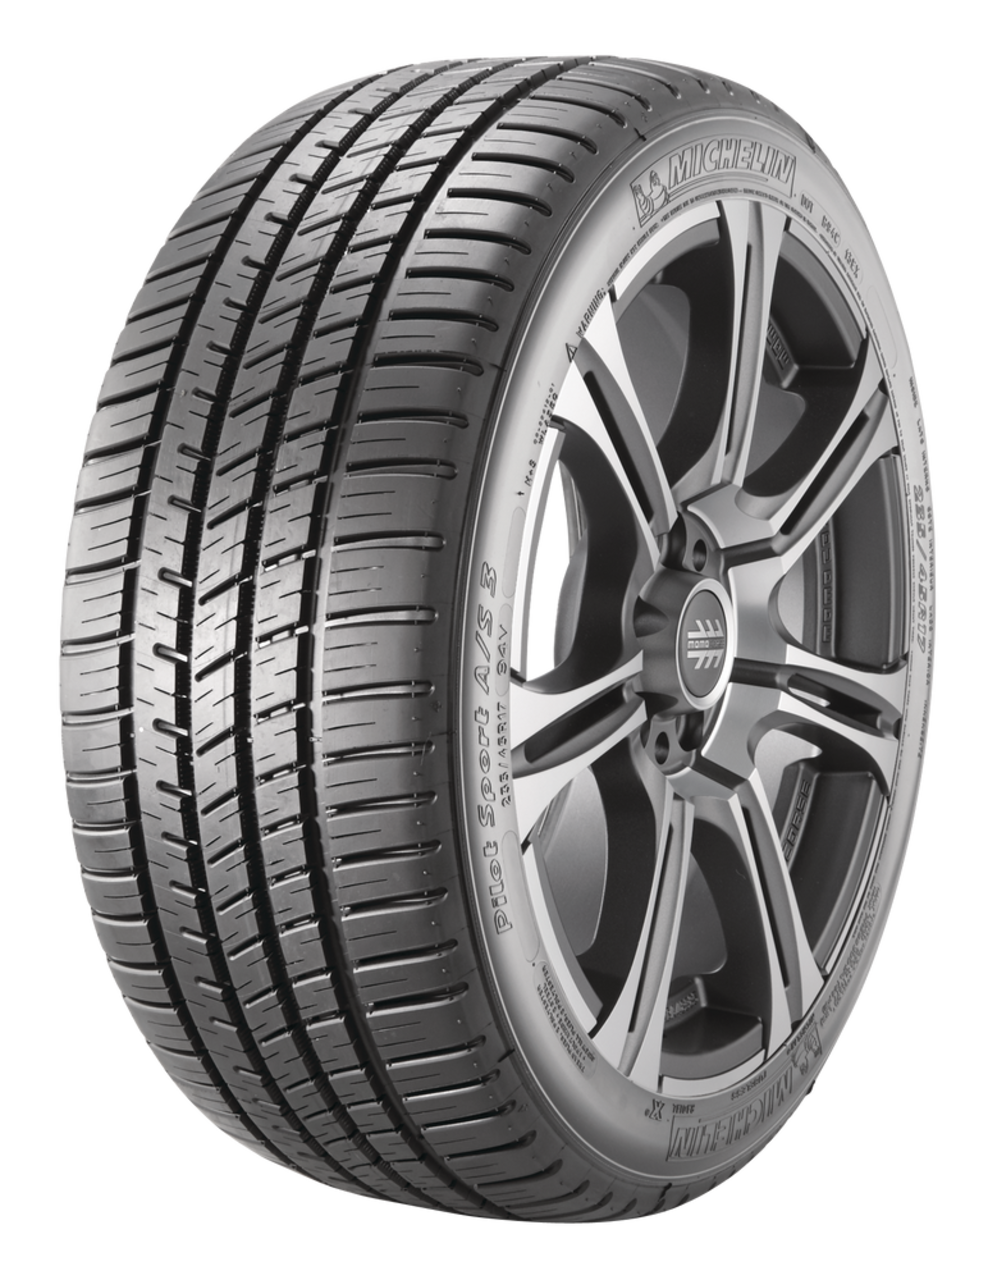 Michelin Pilot Sport A/S 3 Performance Tire For Passenger & CUV